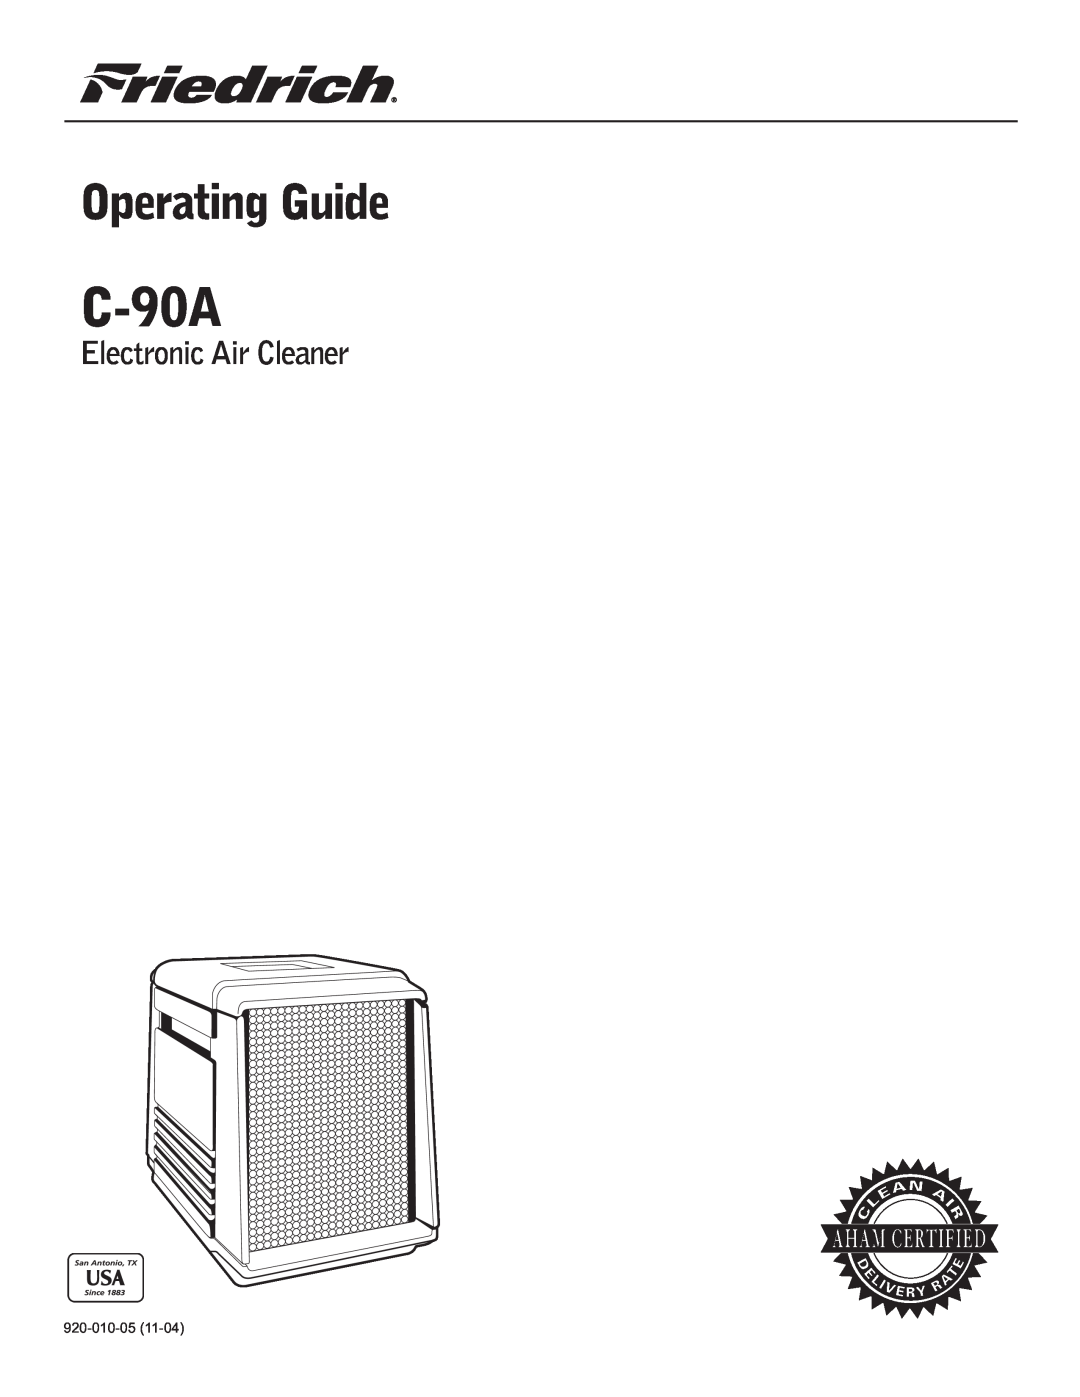 Nilfisk-ALTO C-90A manual Operating Guide, Electronic Air Cleaner 